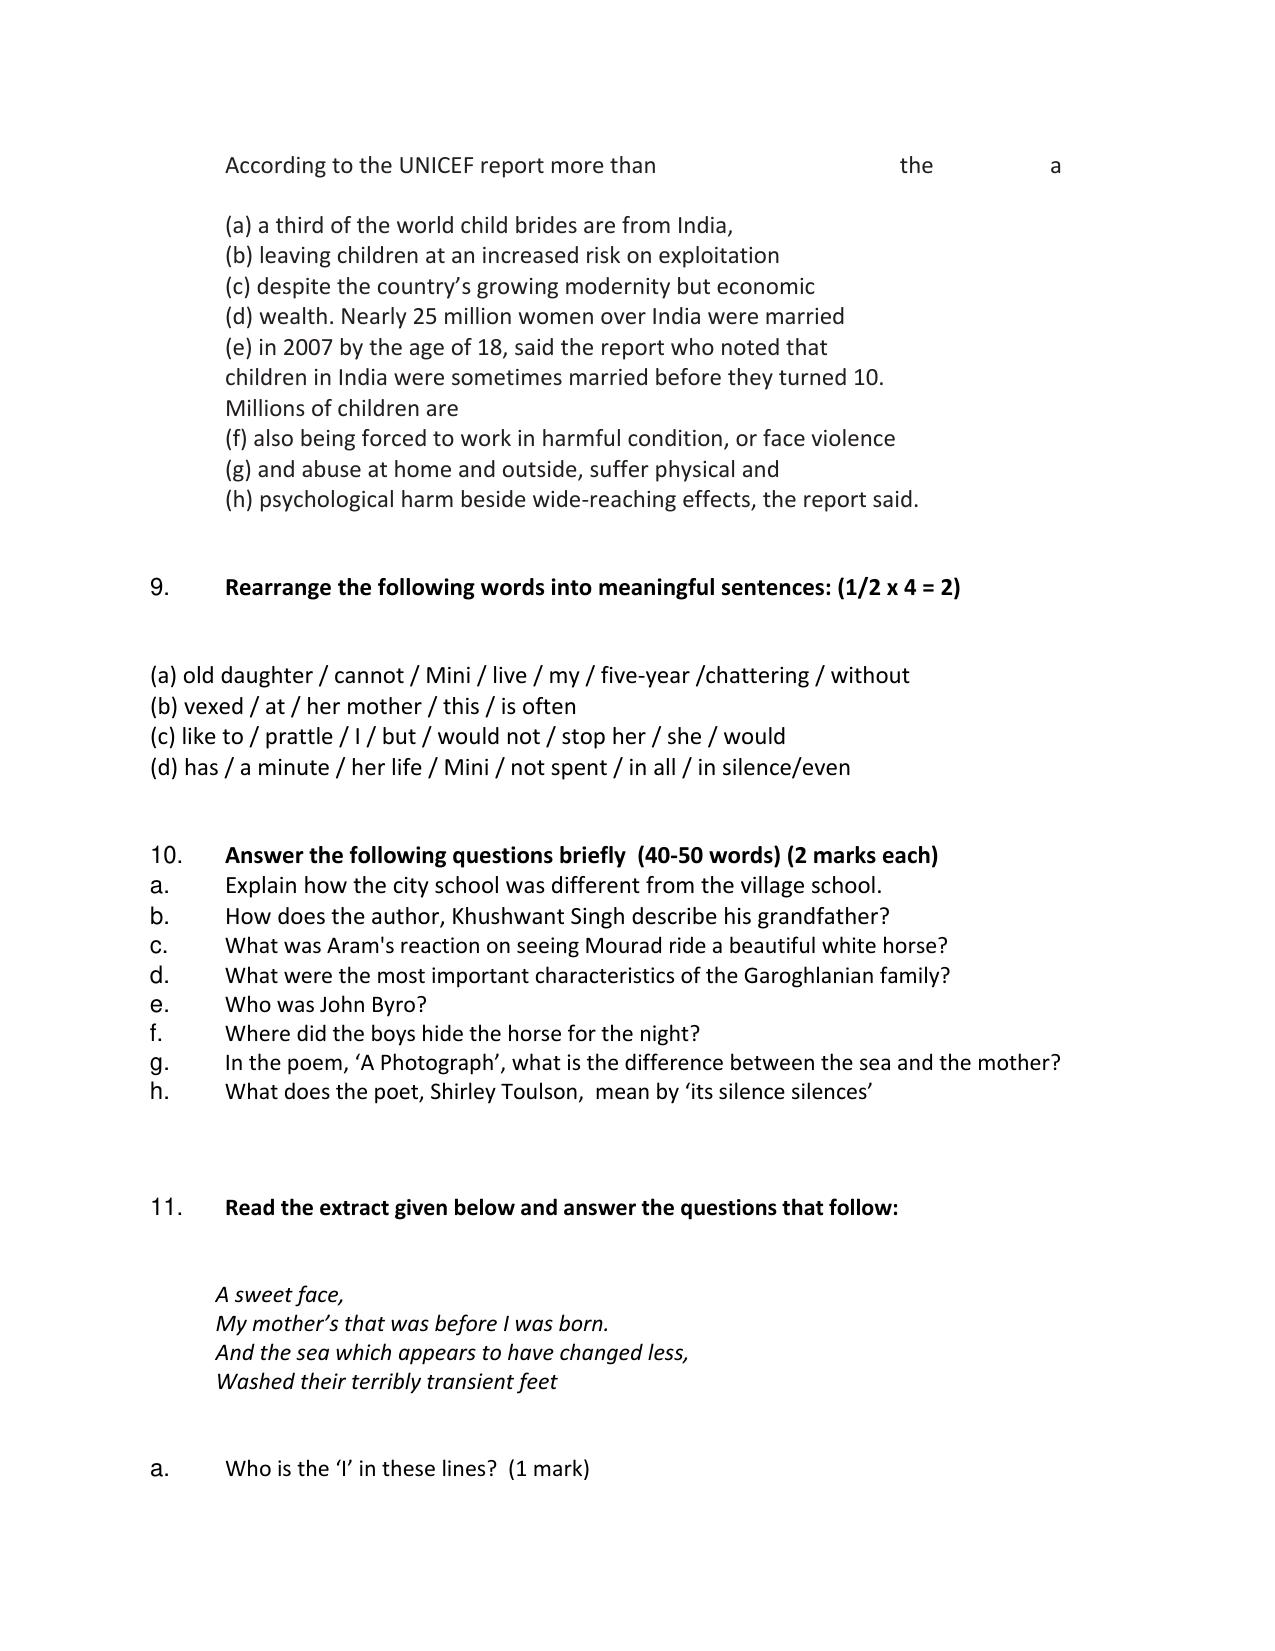 CBSE Worksheets for Class 11 English Assignment 1 - Page 5